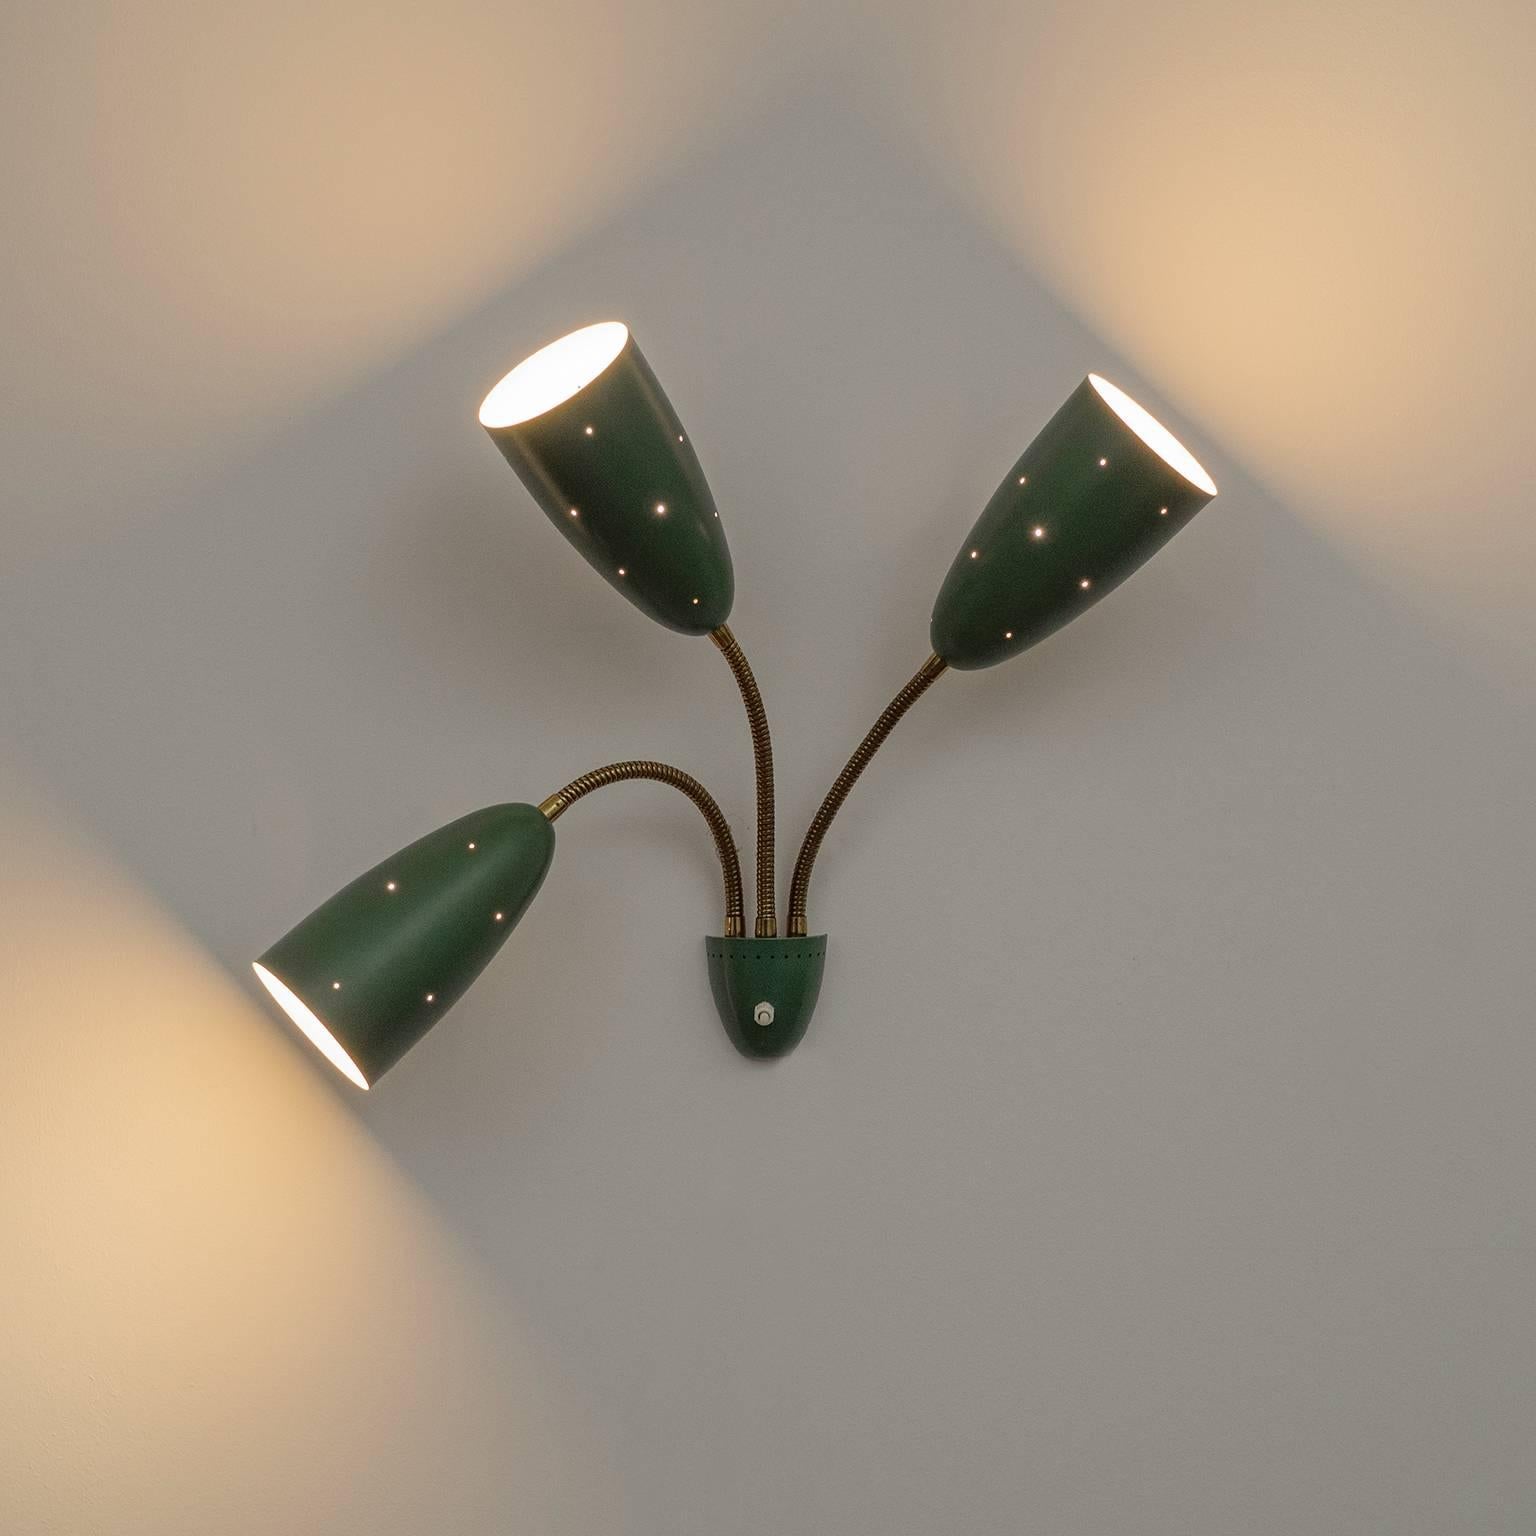 European Large Three-Arm Wall Light with Pierced Green Cones, 1950s